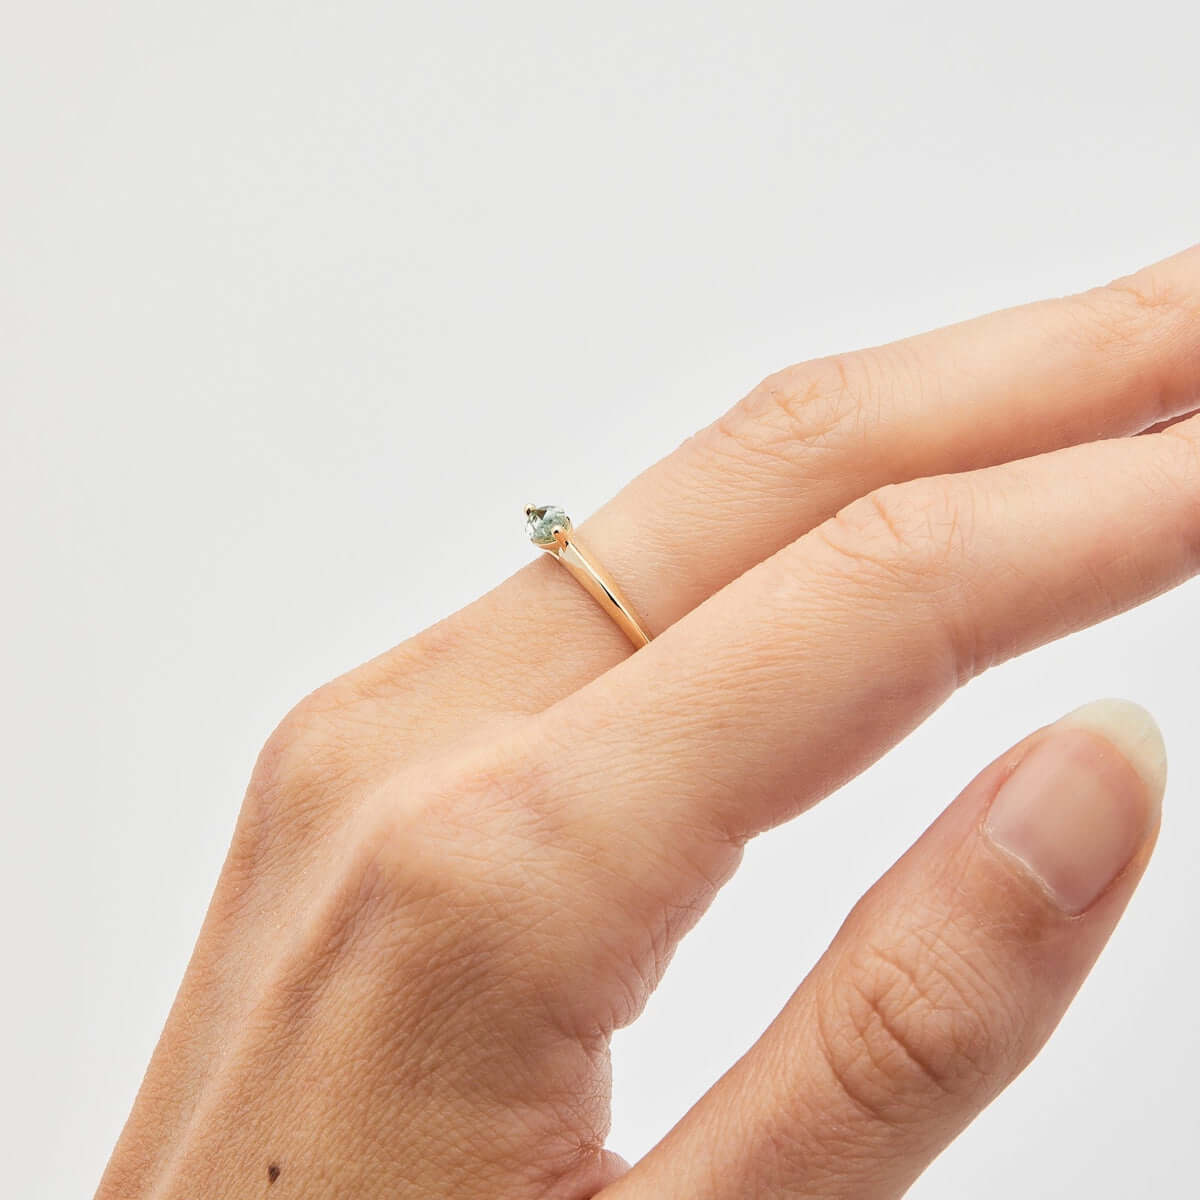 A hand displaying a yellow gold ring with a petite marquise Montana sapphire.